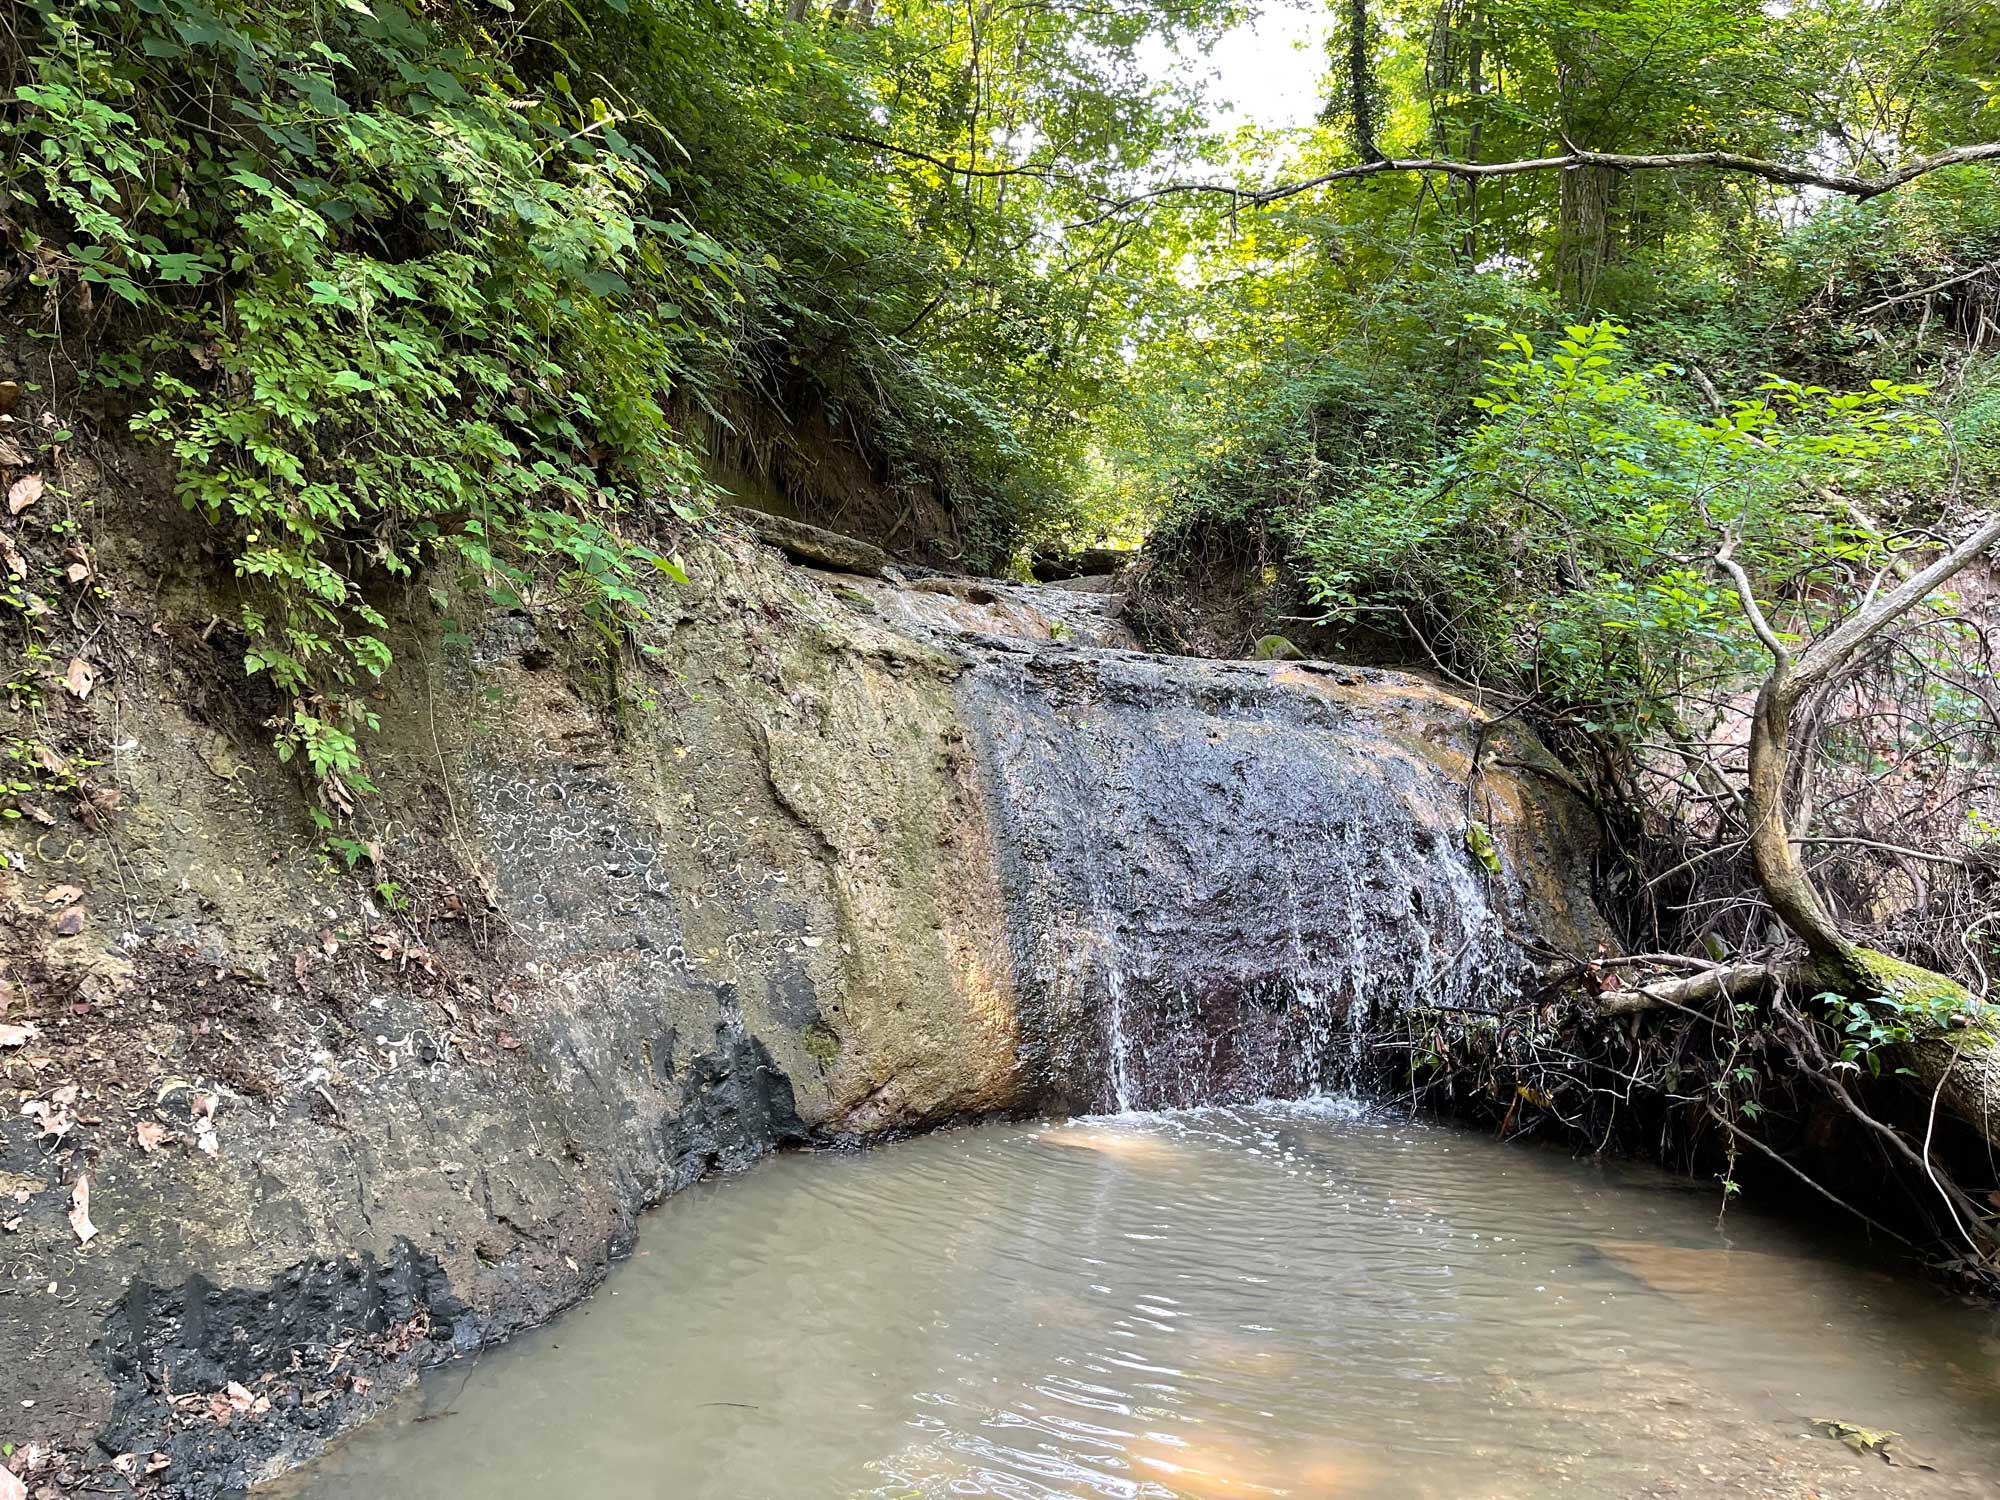 Photograph of the Paleocene Aquia Formation in Maryland. The photo shows a short cliff over which a little water is flowing. The cliff stands above a pool of muddy water. Plants are growing above the cliff.